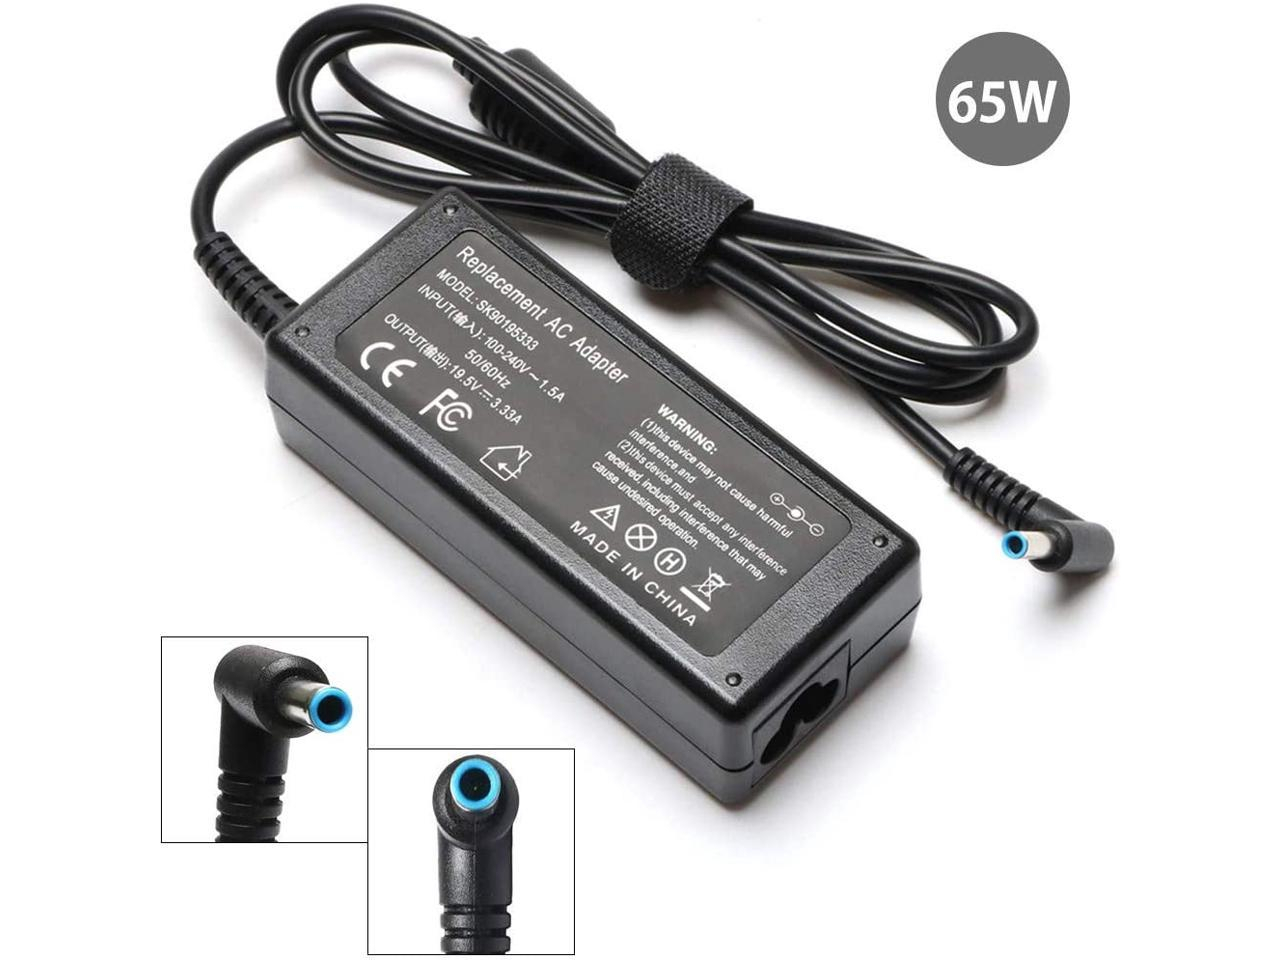 65W Ac Adapter Laptop Charger For Hp Elitebook 840 G3 G4 concernant Hp Elitebook Charger